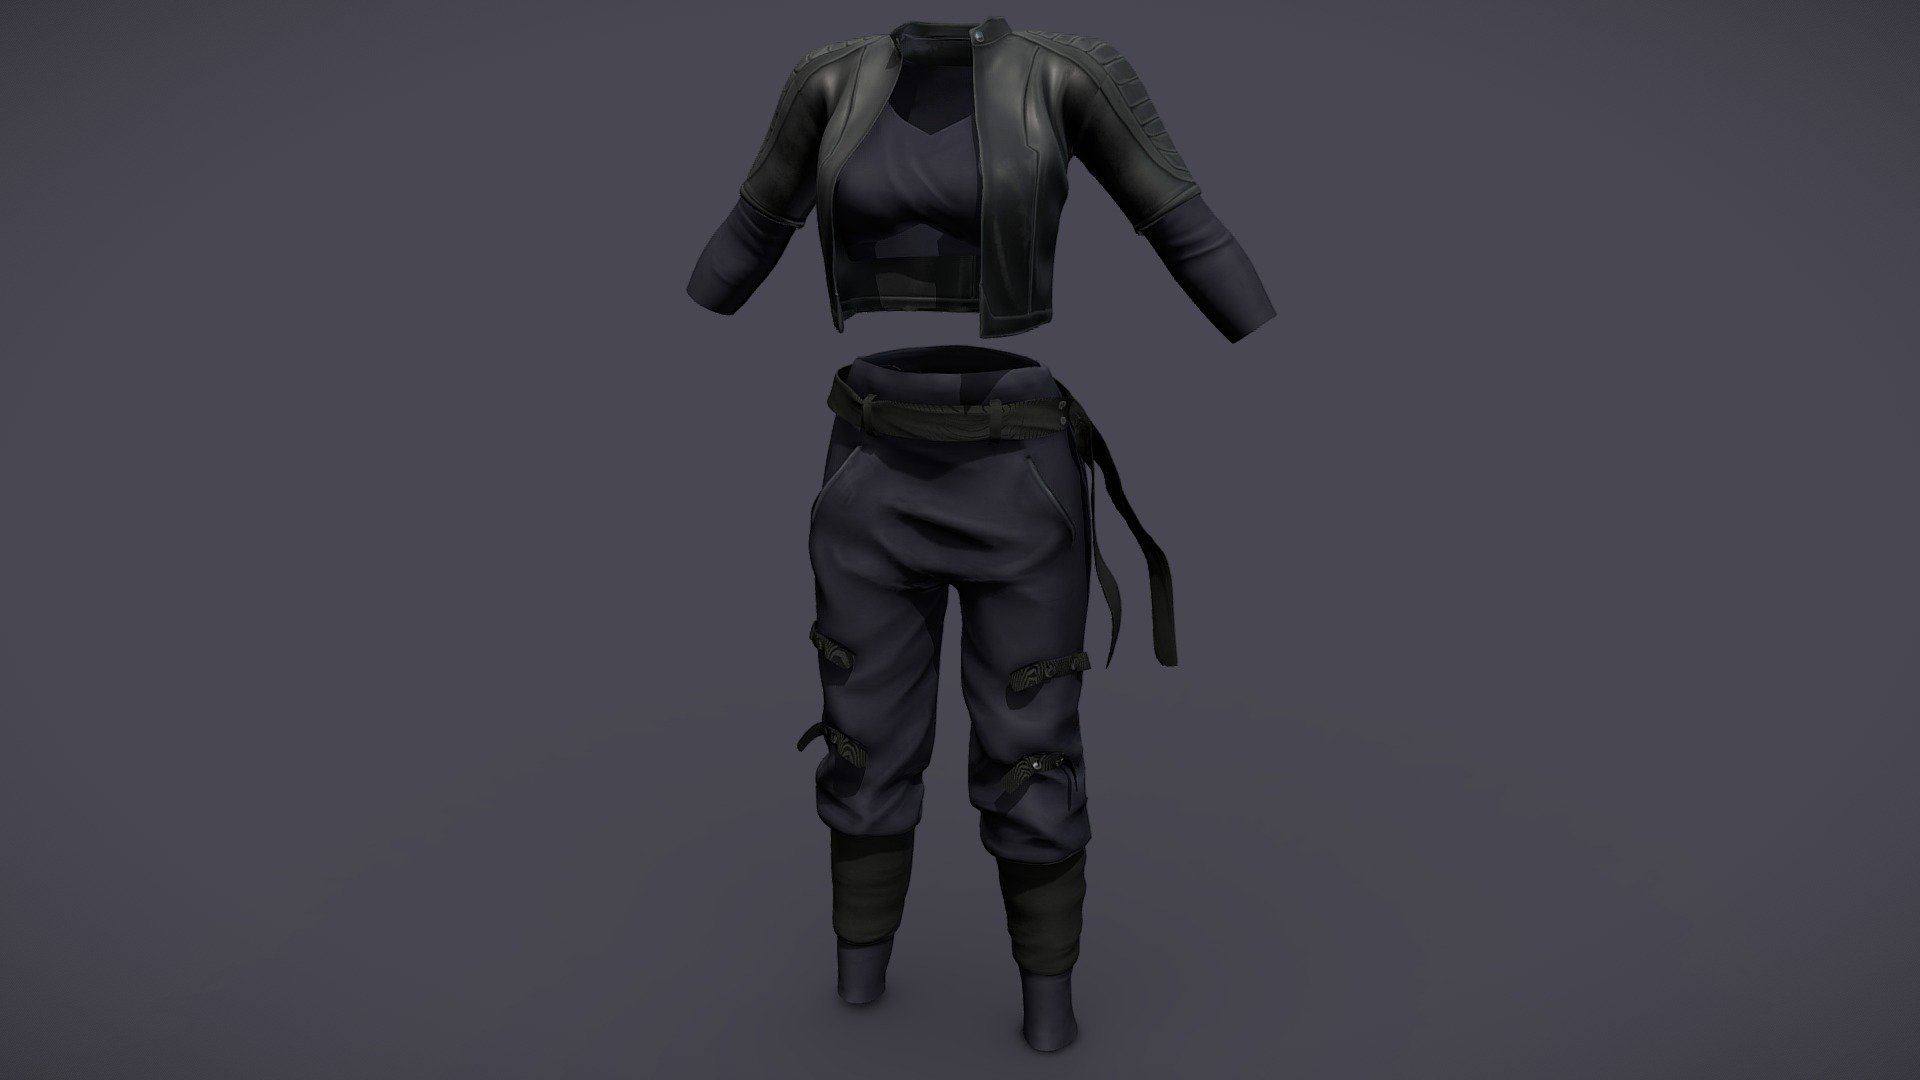 Jacket + Top + Pants

Can be fitted to any character

Clean topology

No overlapping smart optimum unwrapped UVs

High-quality realistic textures

FBX, OBJ, gITF, USDZ (request other formats)

PBR or Classic

Please ask any other questions.

Type     user:3dia &ldquo;search term